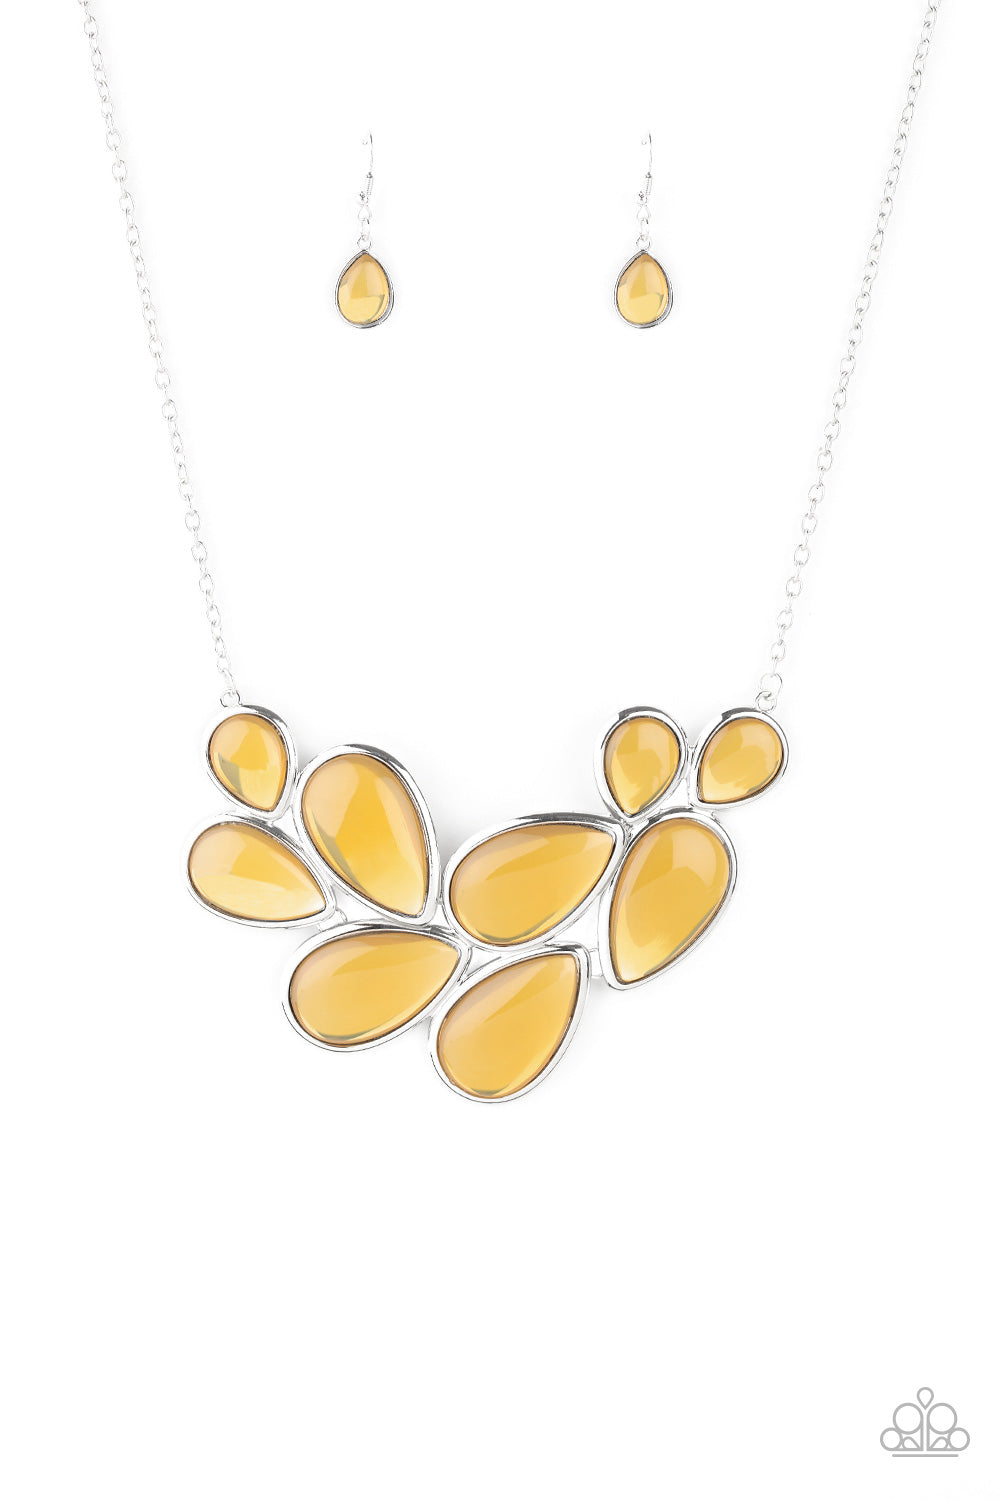 Iridescently Irresistible Yellow Necklace - Paparazzi Accessories